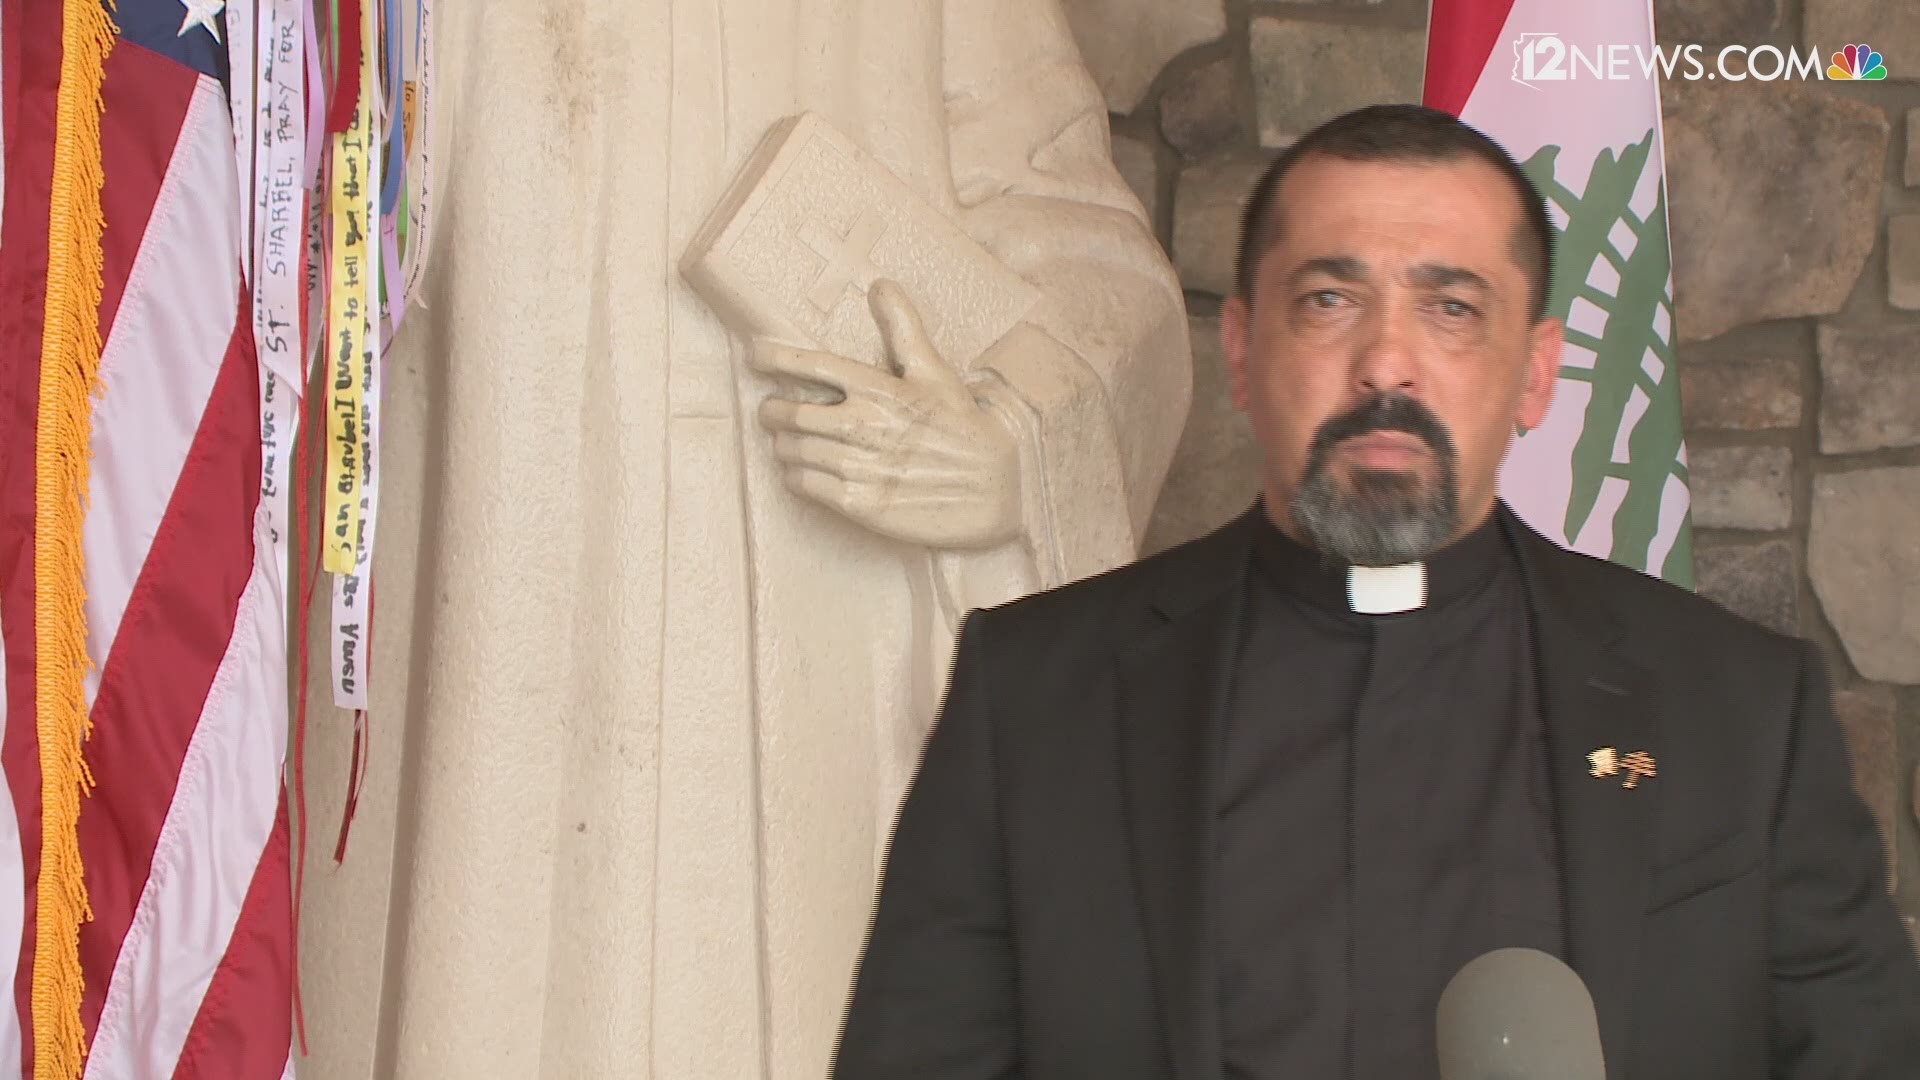 Father Wissam Akiki prayed for the poor and the voices silenced by leaders during a vigil Monday. Father Akiki is the pastor at St. Joseph’s Maronite Catholic Church